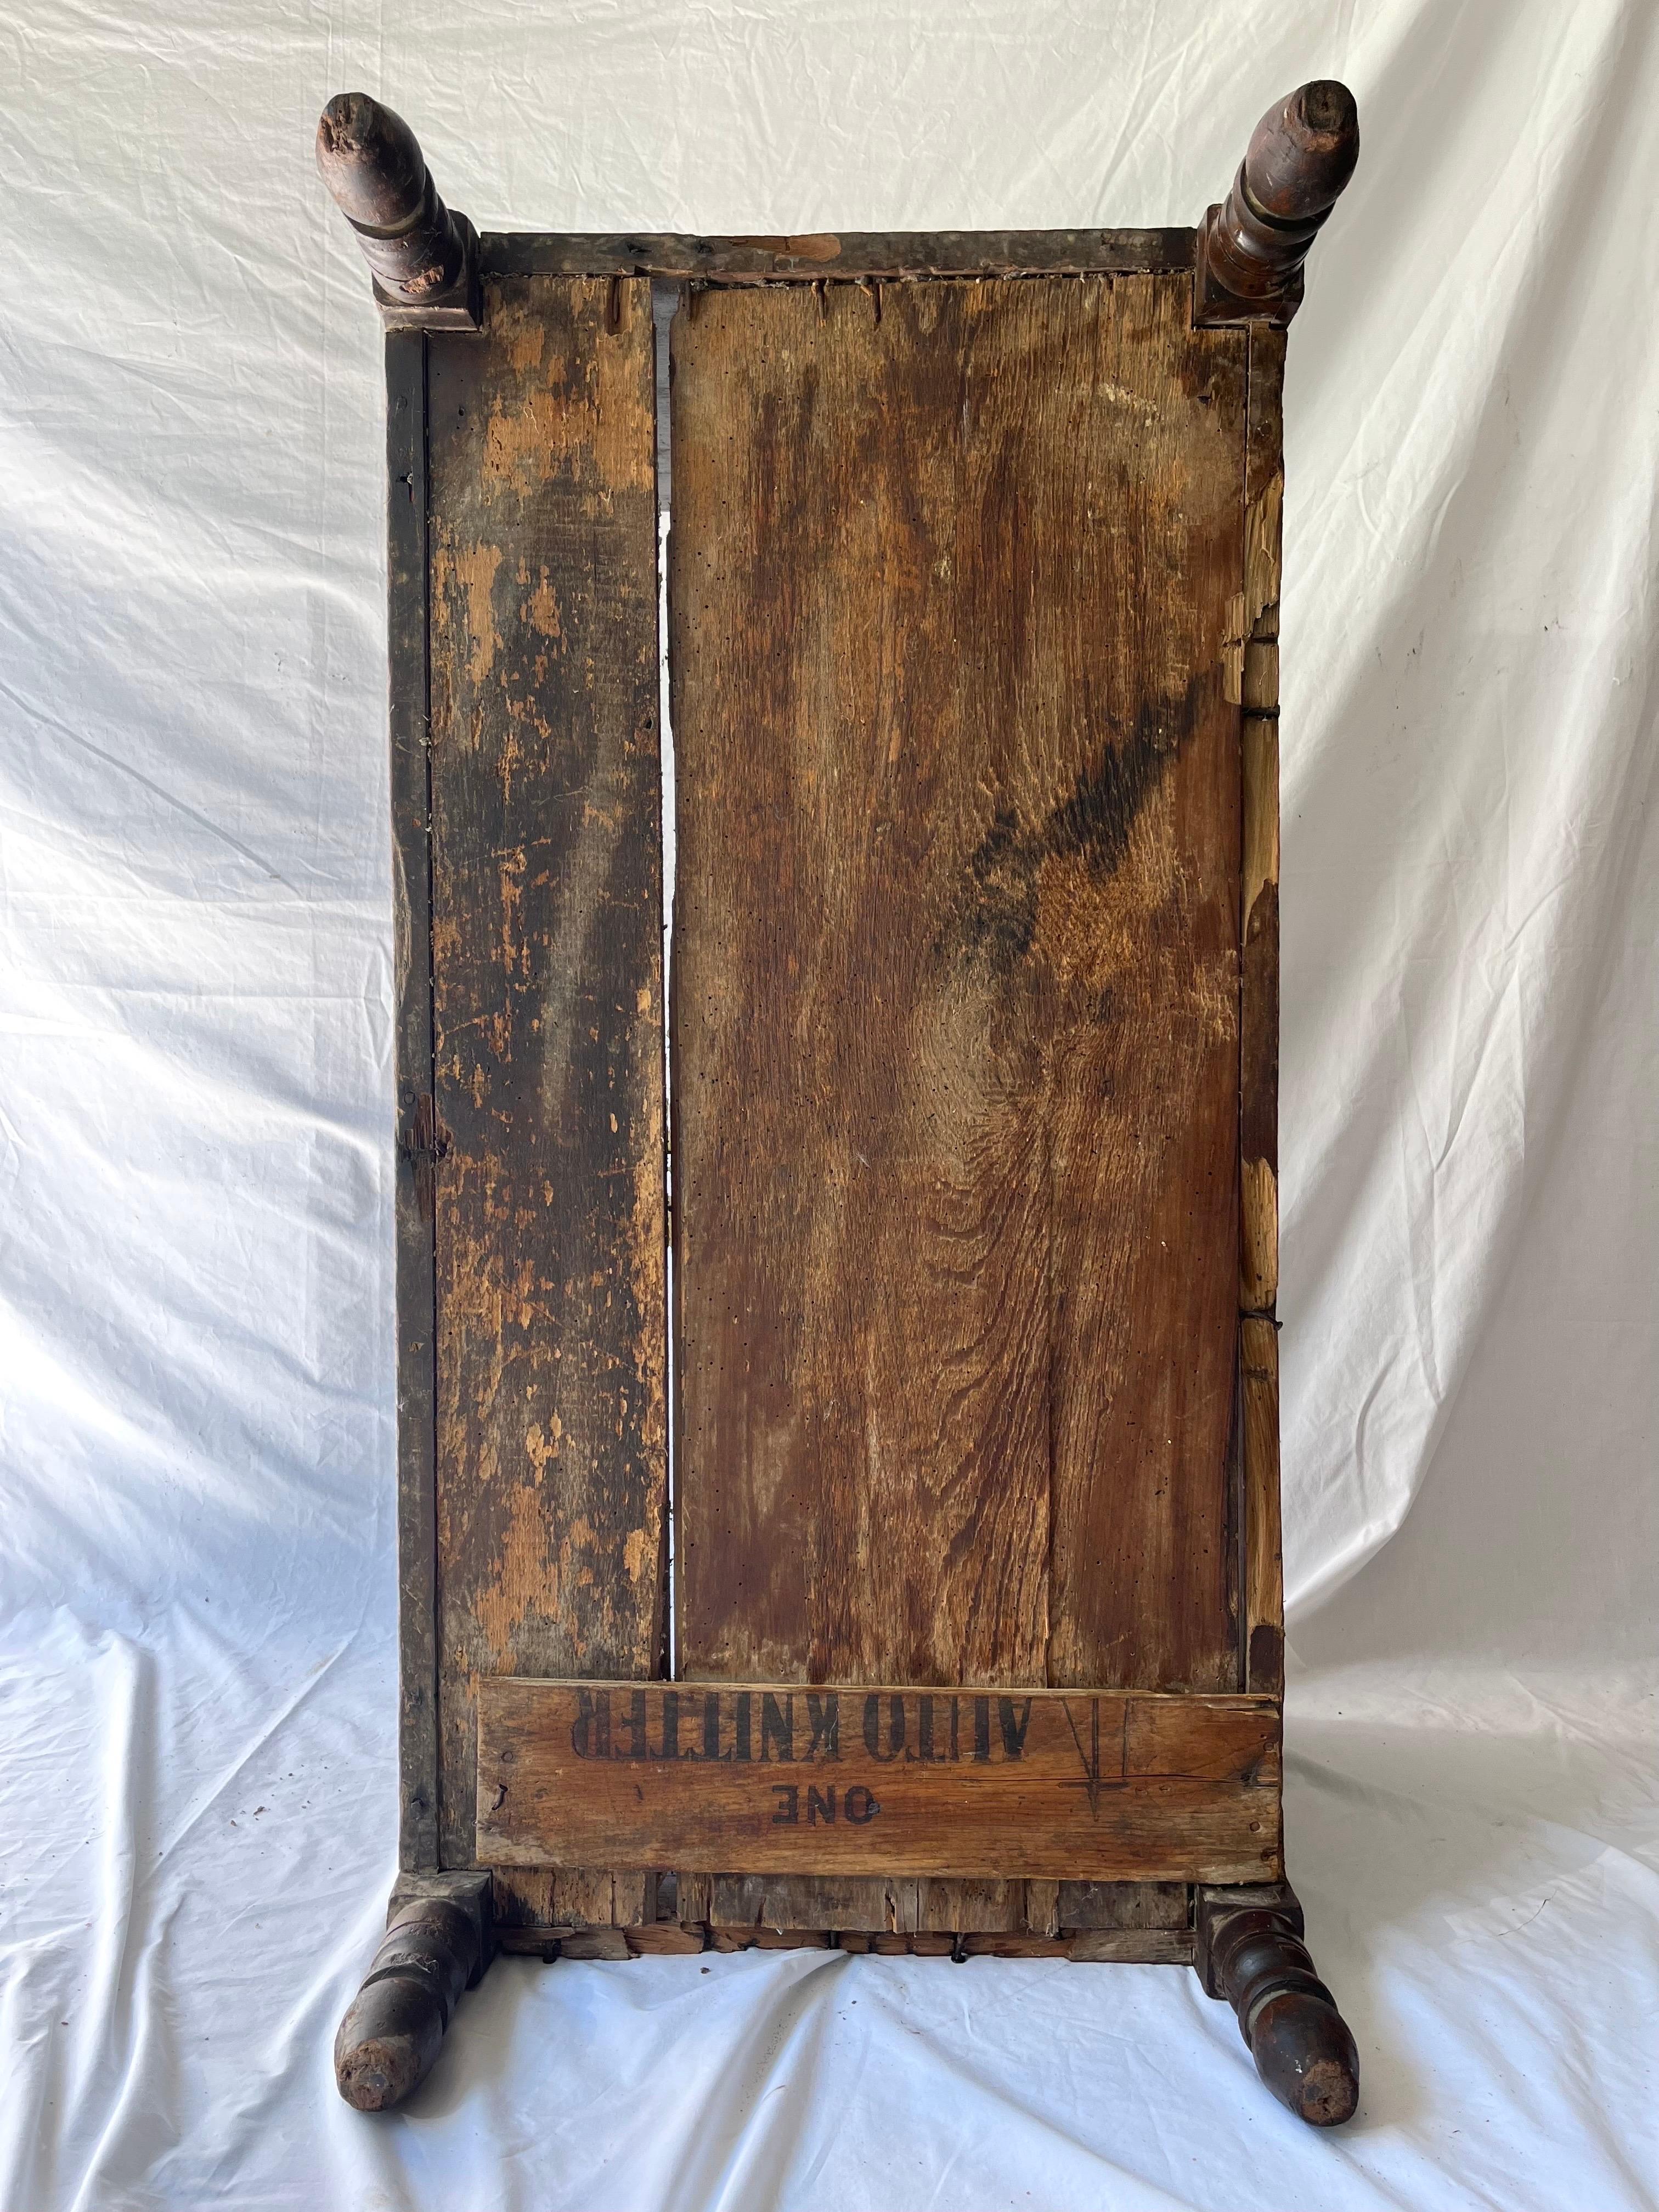 Tennessee Antique American Hand Built Primitive Blanket Chest Relic Cow Feeder In Distressed Condition For Sale In Atlanta, GA